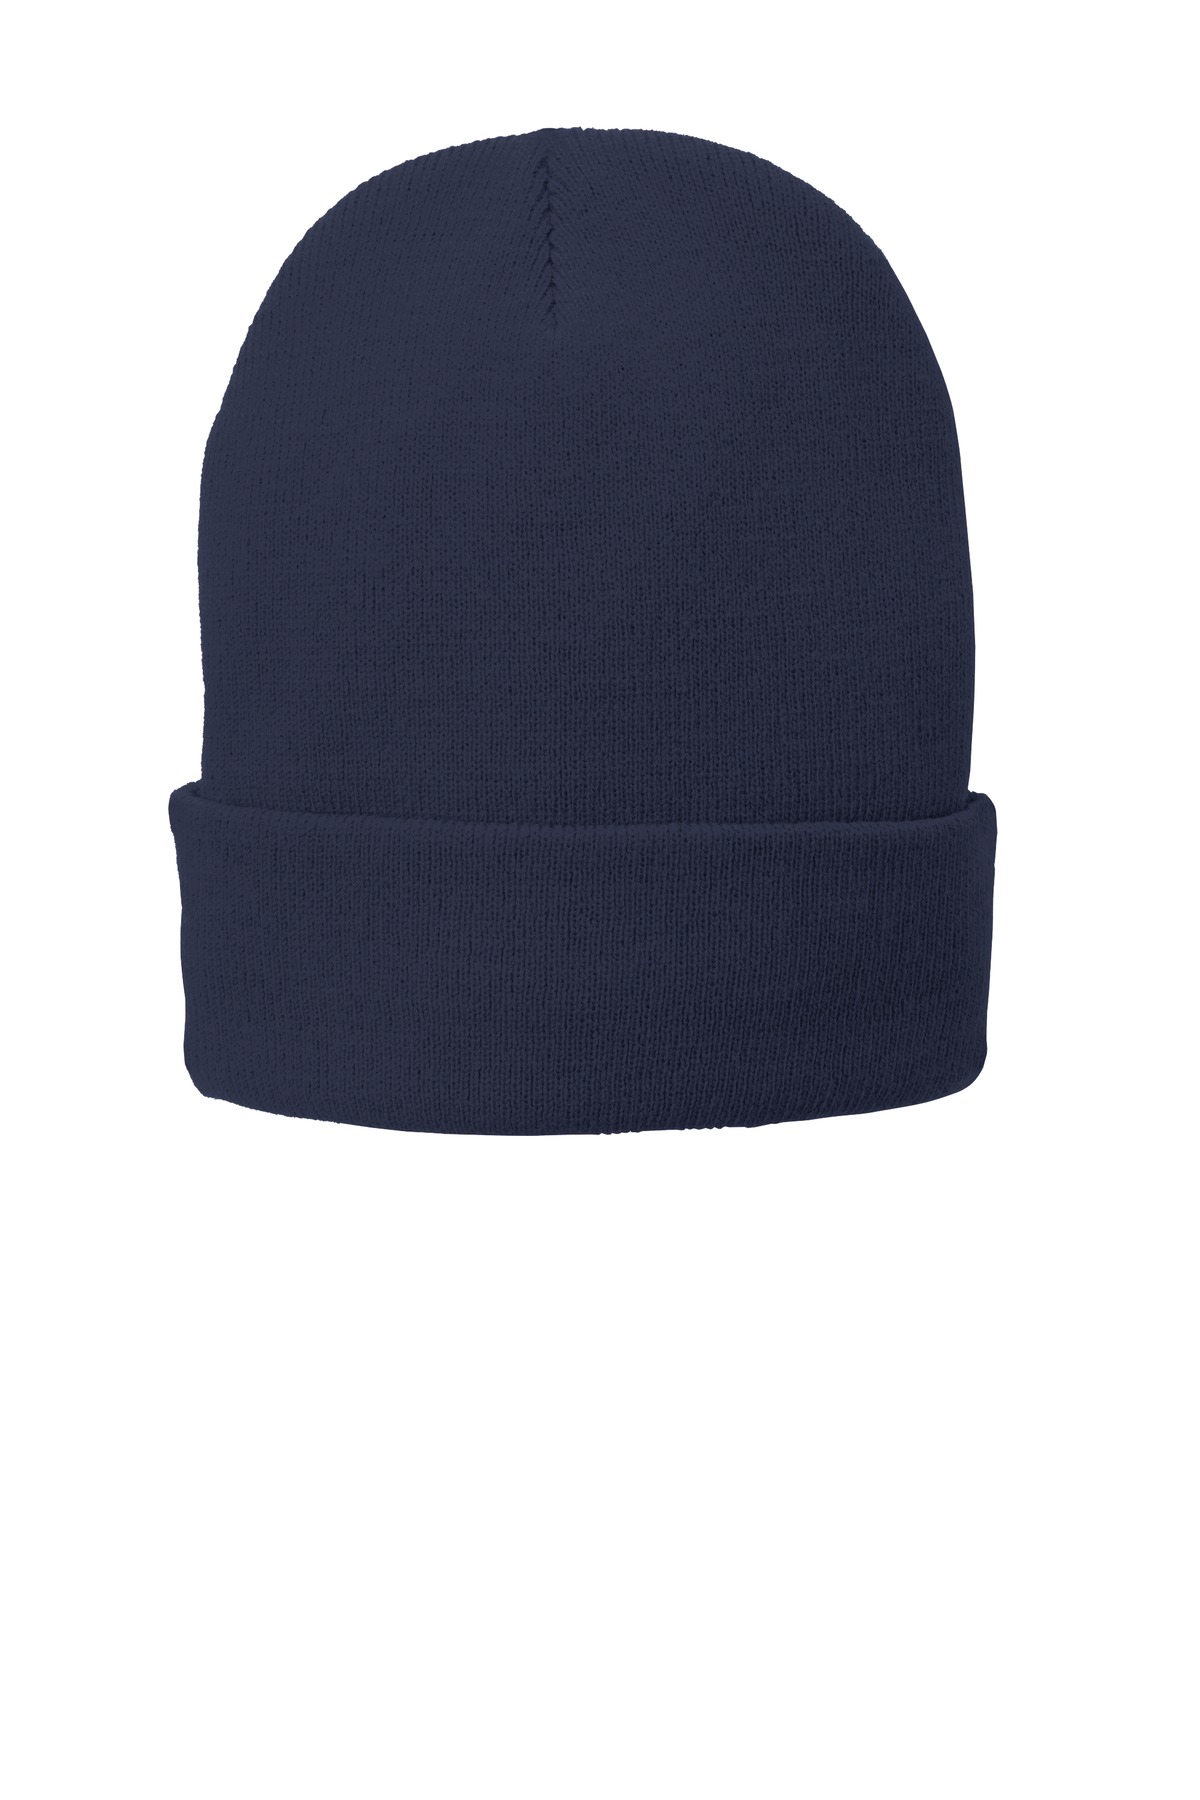 Port and Company Fleece-Lined Knit Cap. CP90L